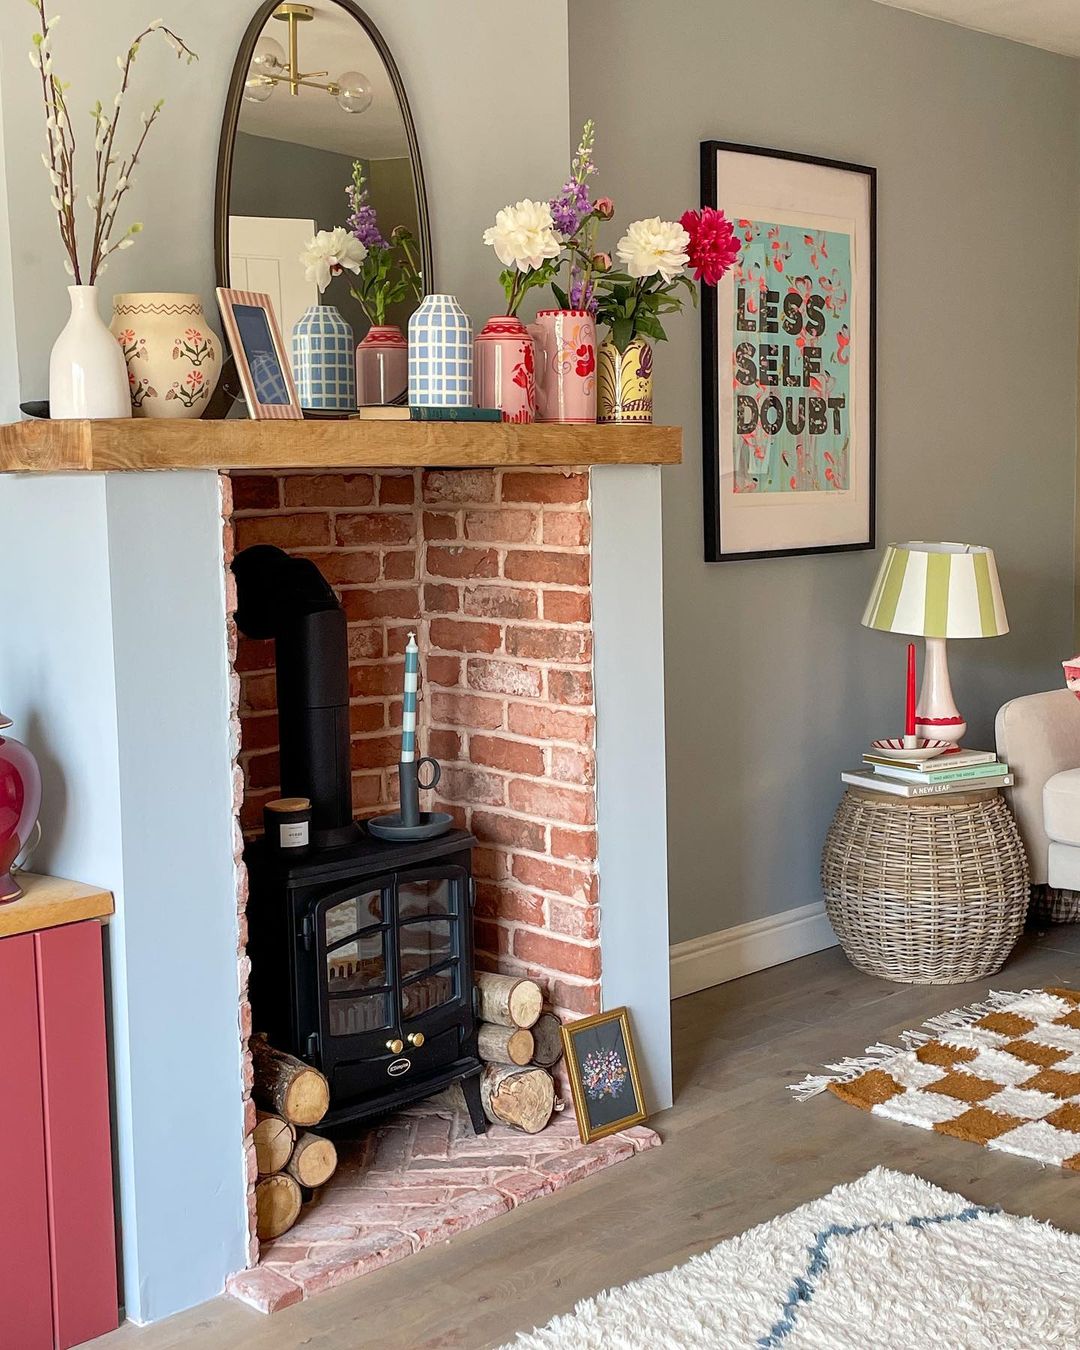 Charming Eclecticism: Vibrant Accents on Classic Brick